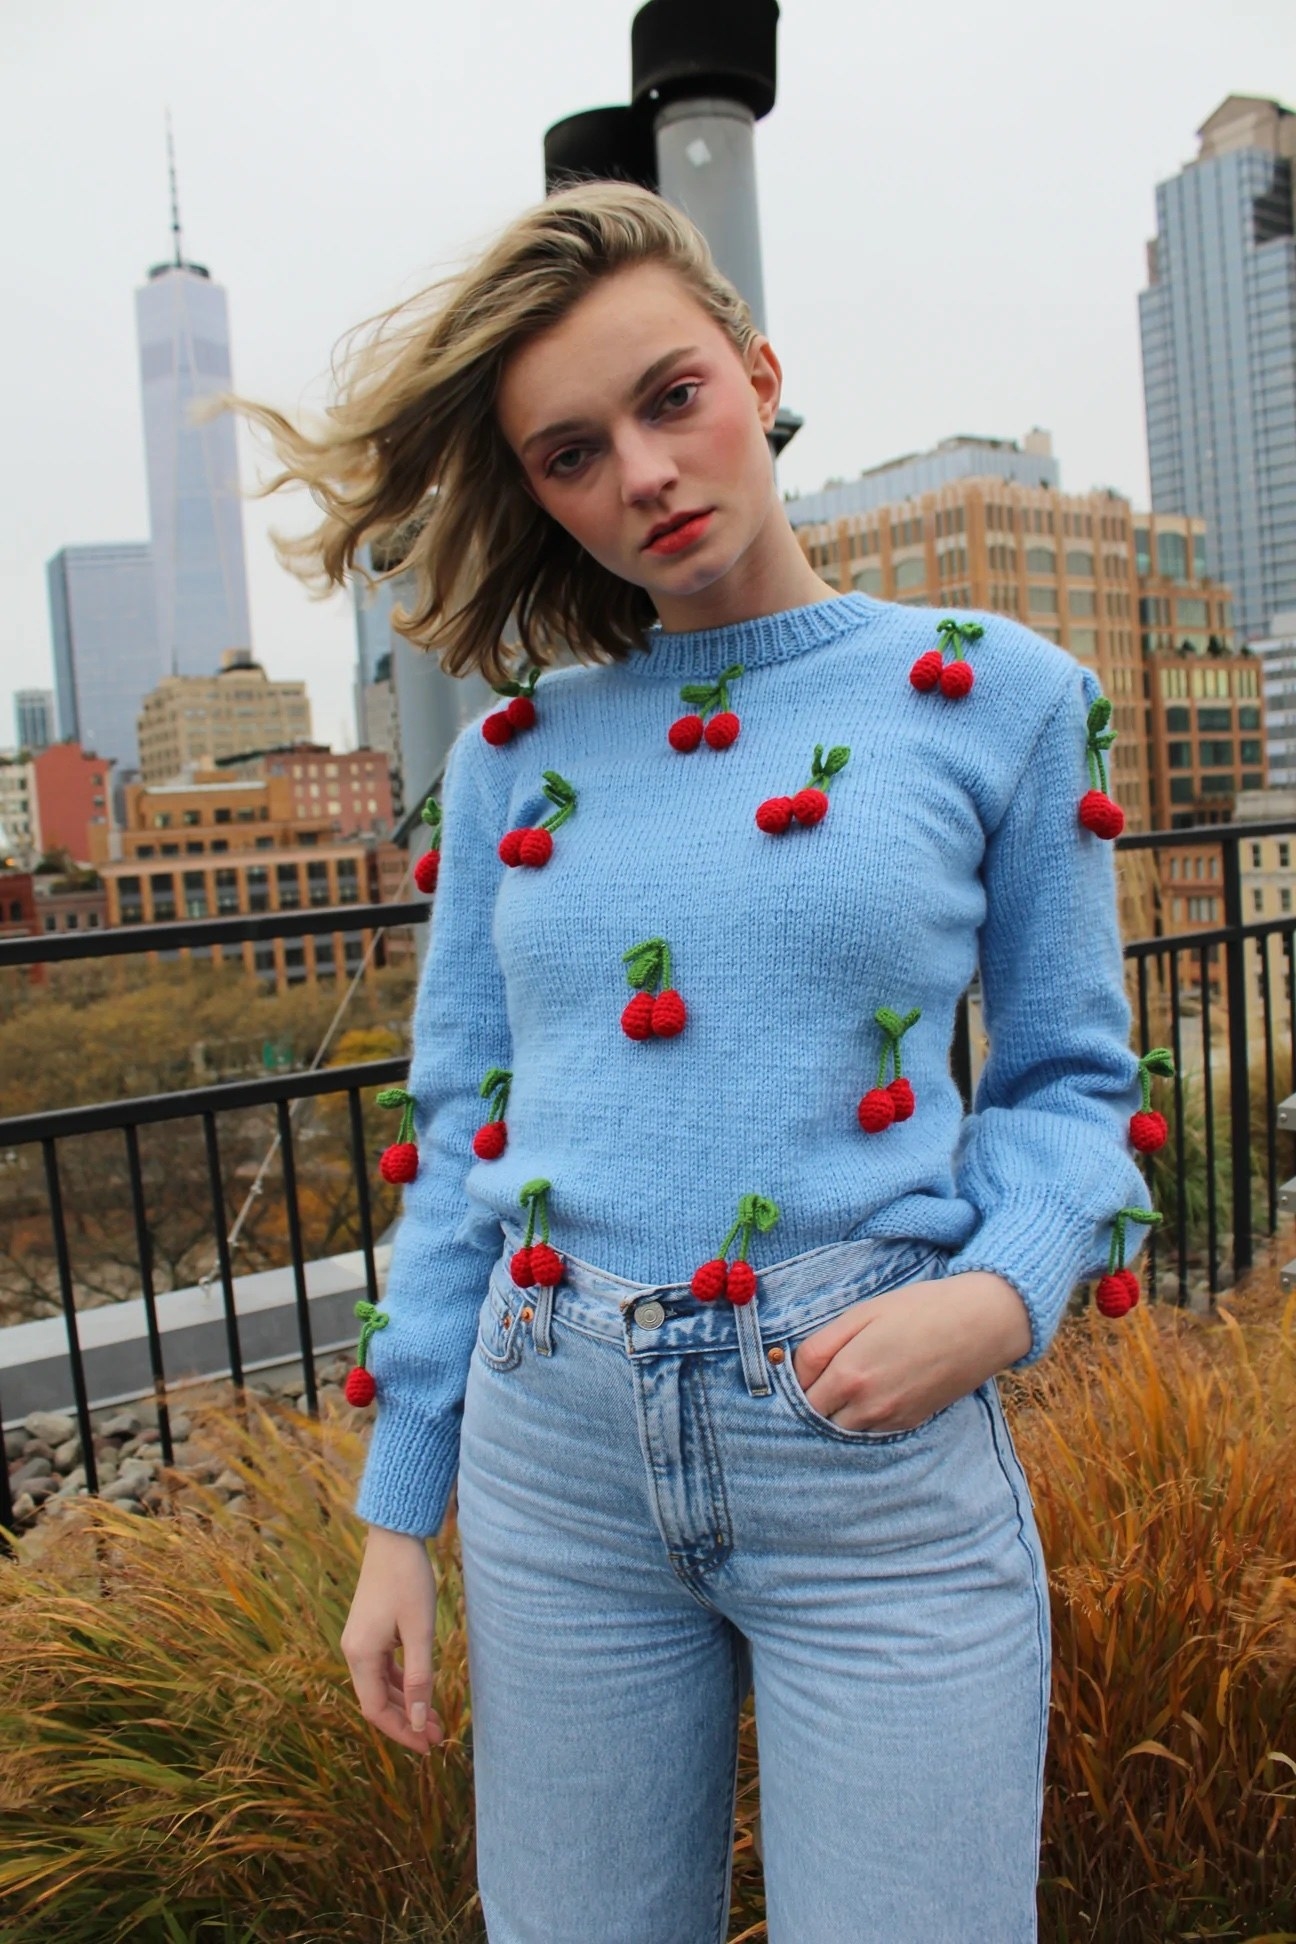 model in light blue sweater with 3D knit cherries all over it